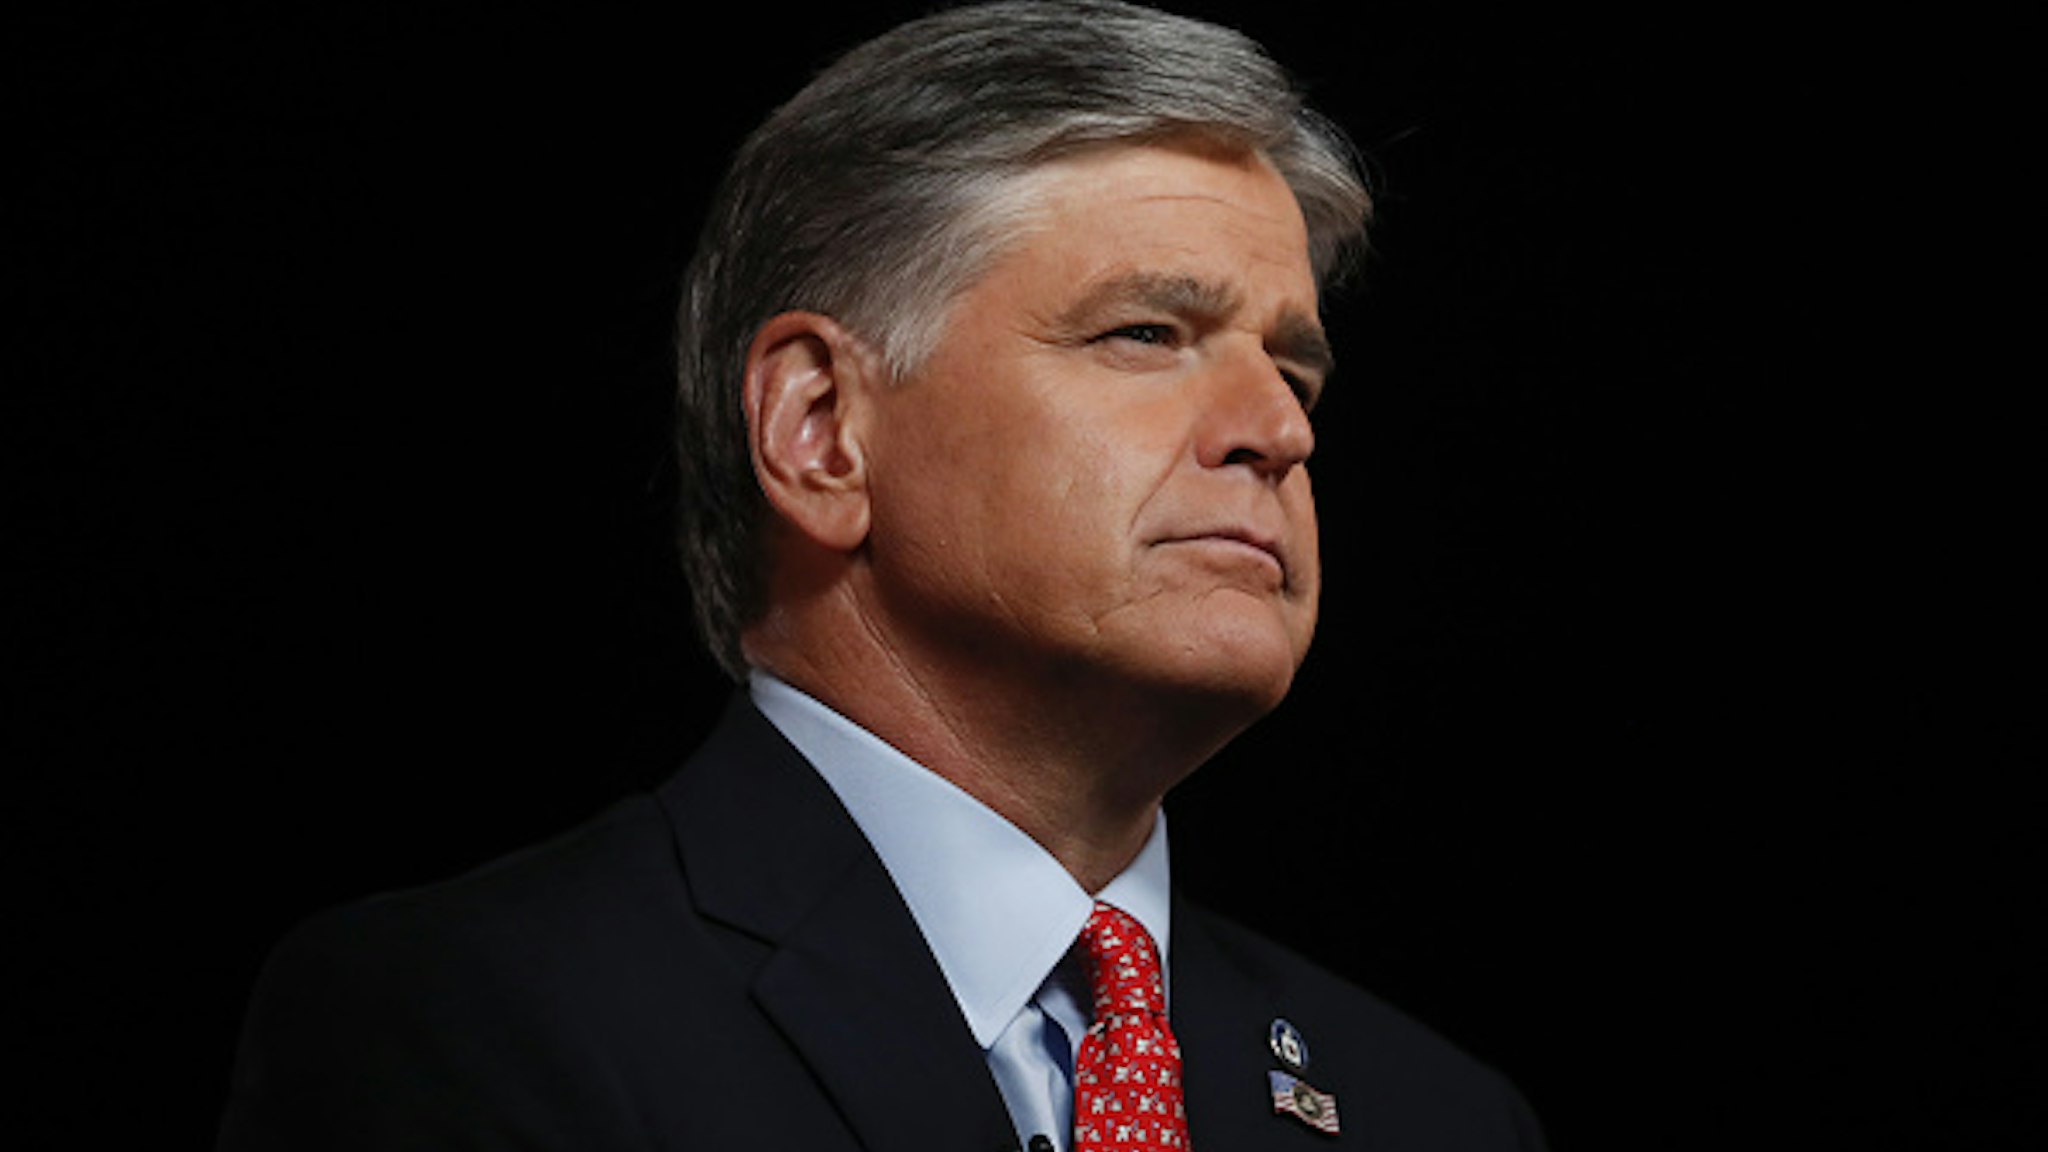 Sean Hannity, host at Fox News, broadcasts from the Republican National Convention at Fort McHenry National Monument and Historic Shrine in Baltimore, Maryland, U.S., on Wednesday, Aug. 26, 2020. Vice President Pence will make the case for a second term for himself and President Trump today capping a night at the Republican National Convention designed to emphasize the military, law enforcement and public displays of patriotism.